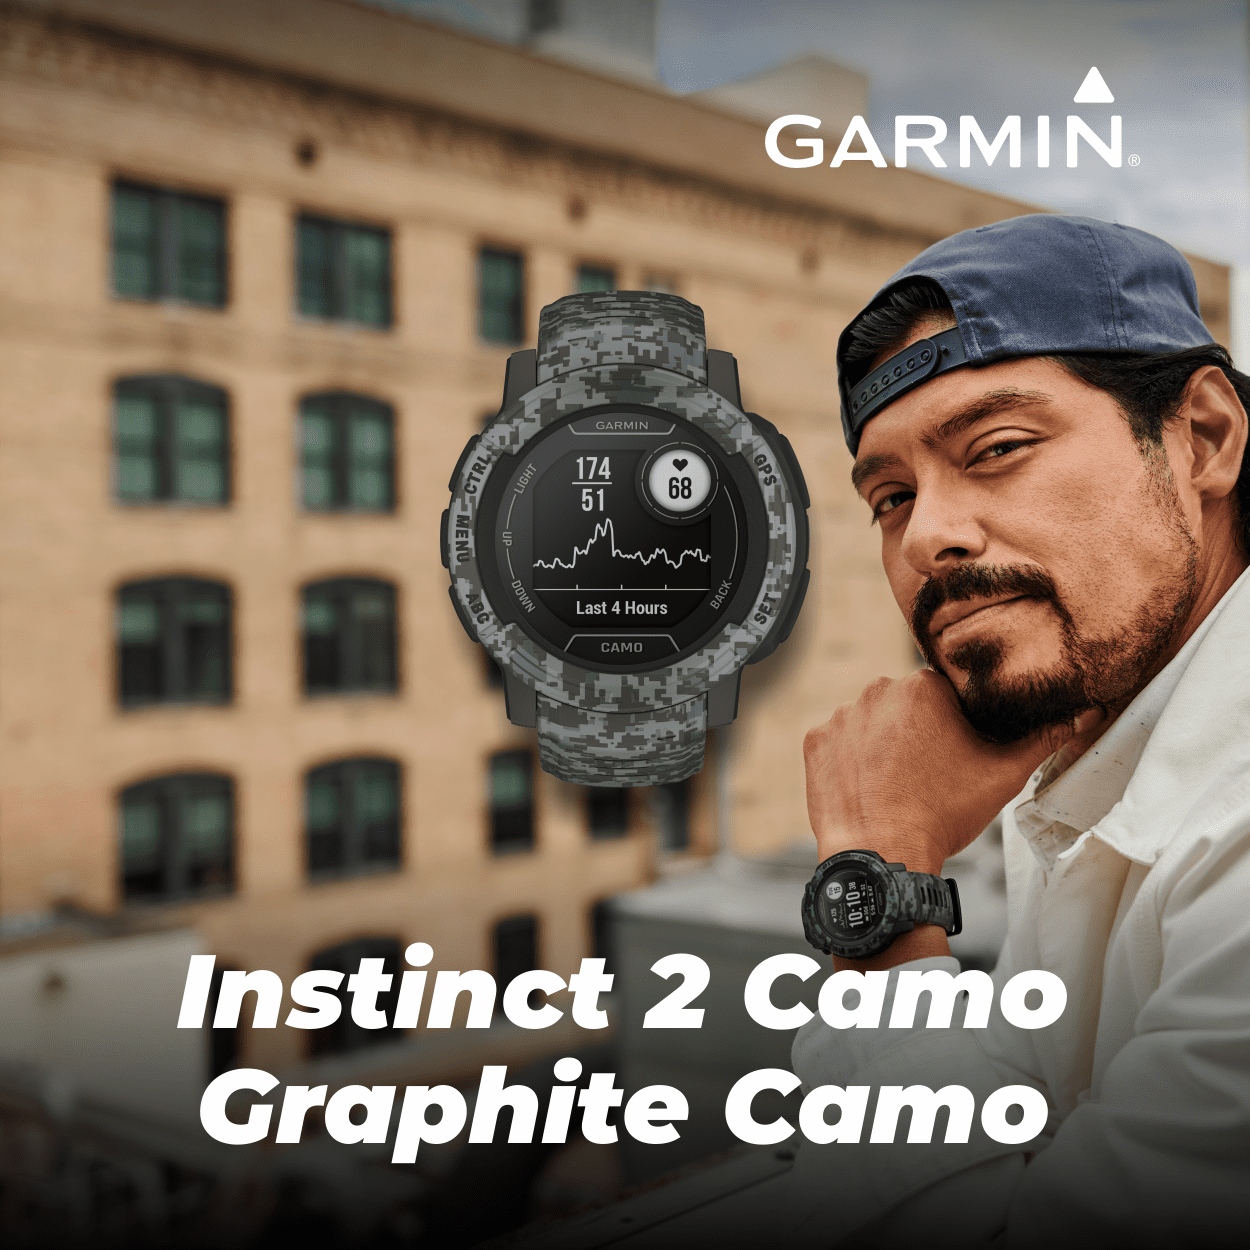 Garmin Instinct 2 Solar Tactical Edition GPS Rugged Outdoor Smartwatch,  Coyote Tan with Multi-GNSS Support with Wearable4U Black EarBuds Bundle 